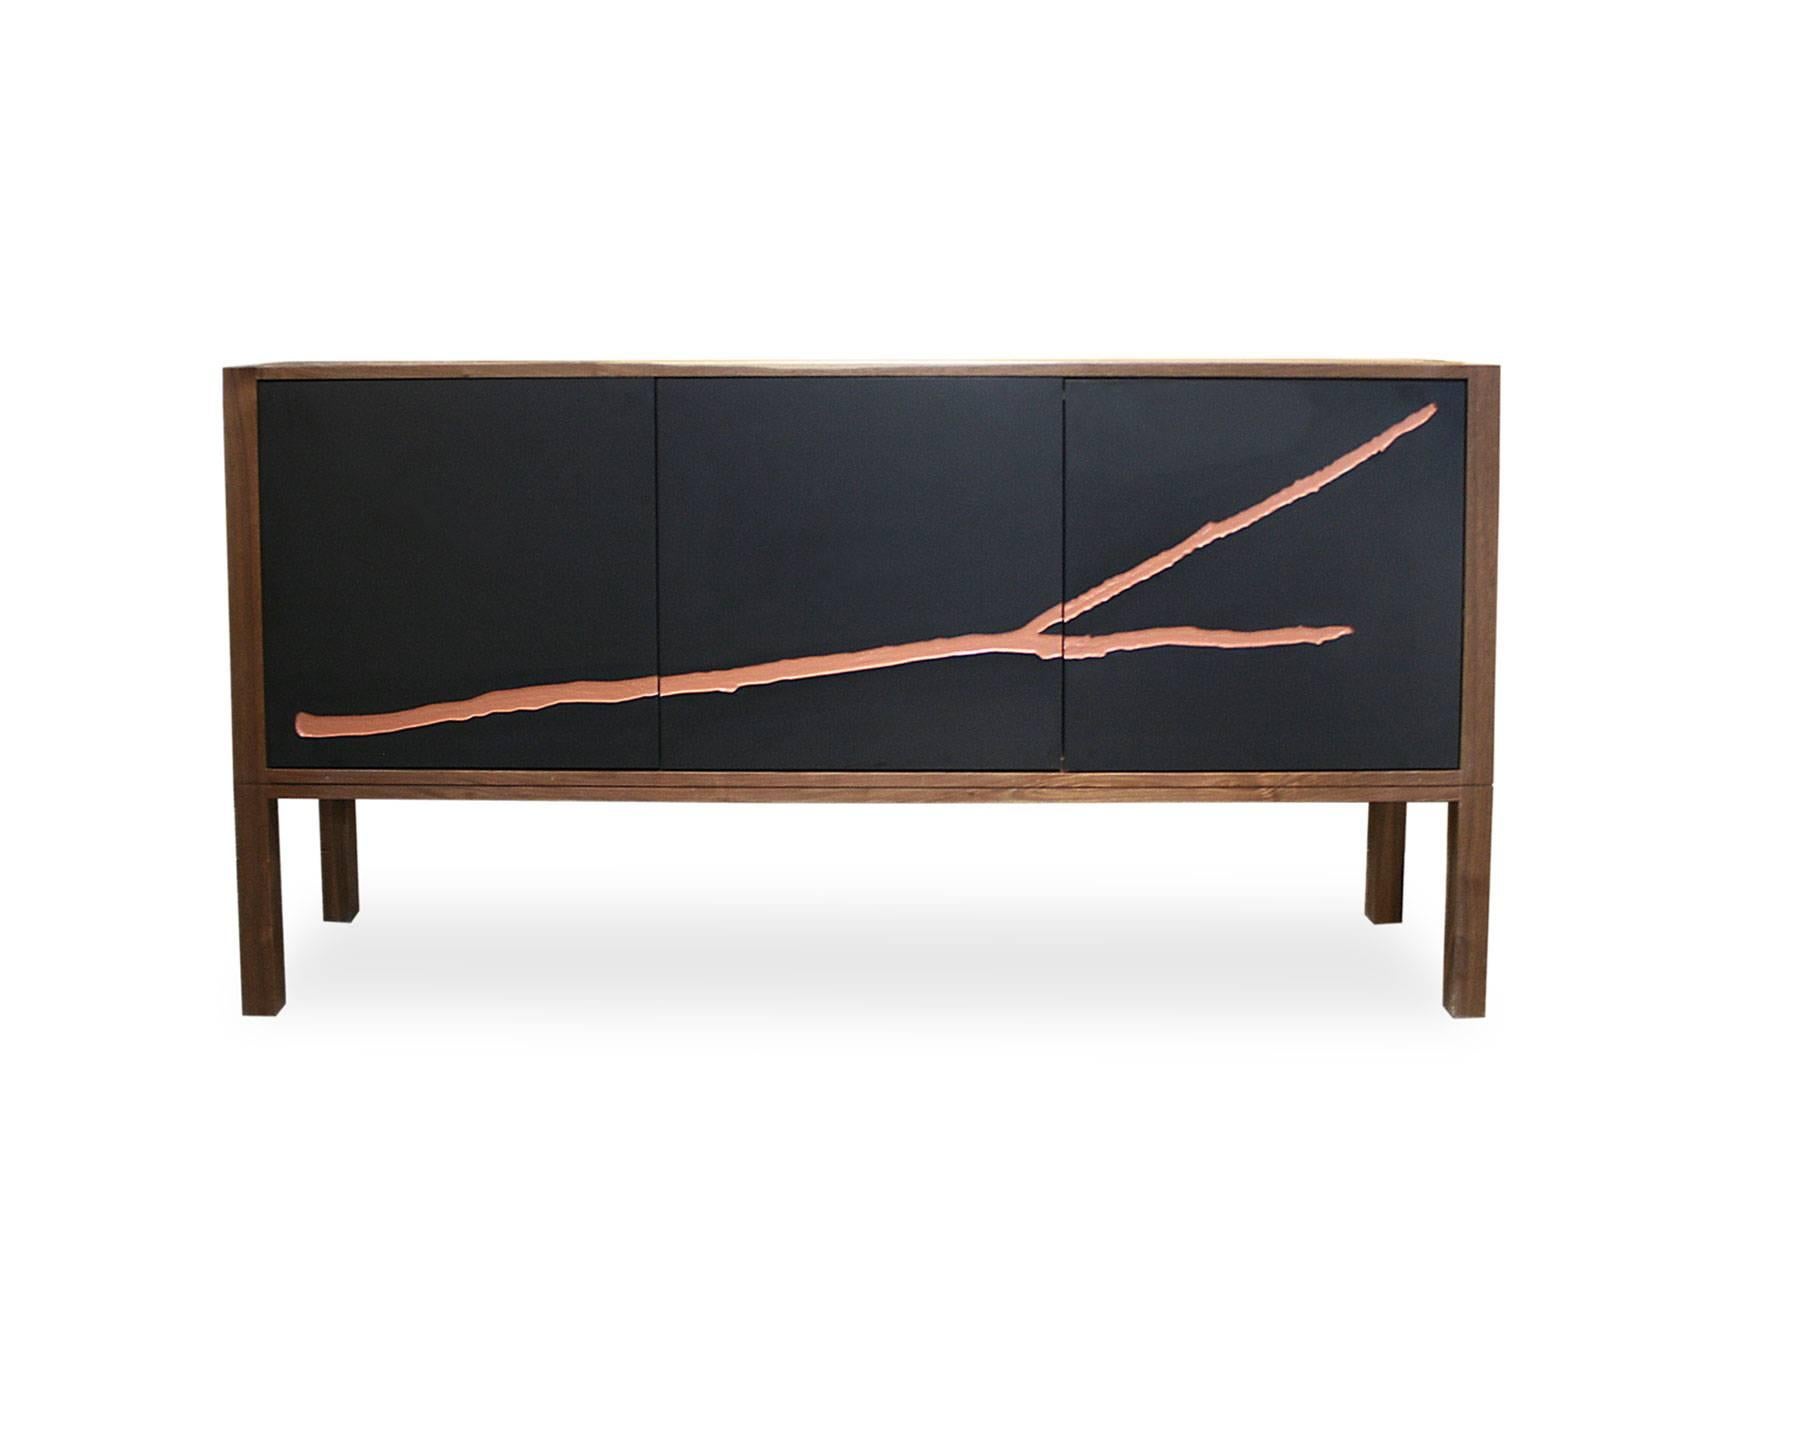 Shimna Neosho Walnut Credenza with Engraved Branch Art In New Condition For Sale In Brooklyn, NY